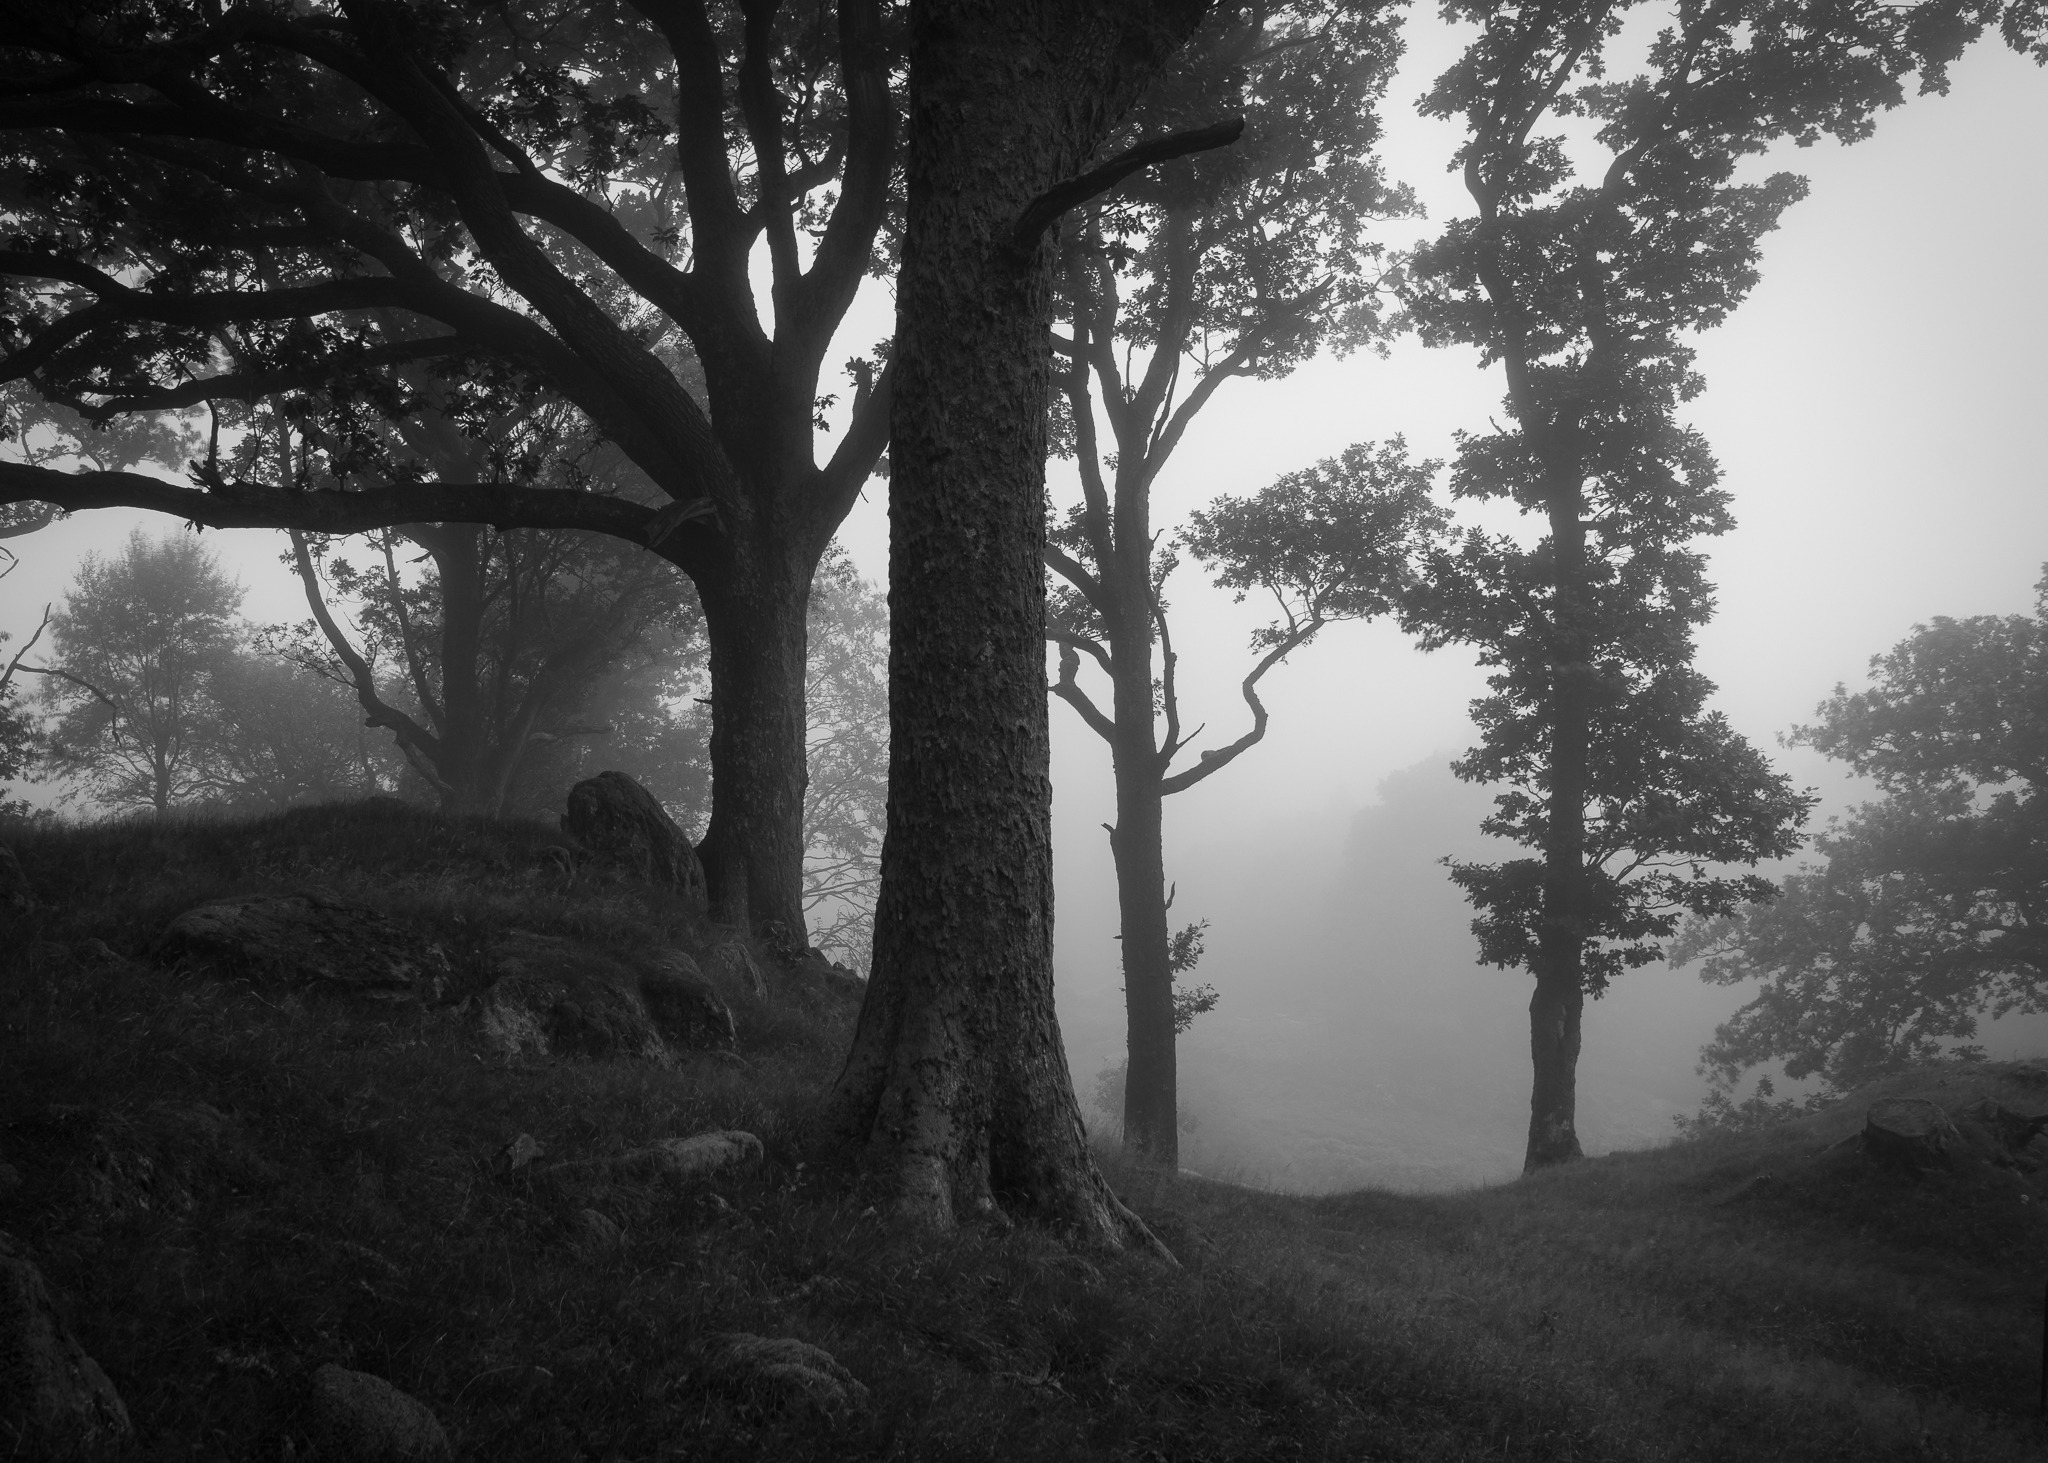 Why use black and white for landscape photography?